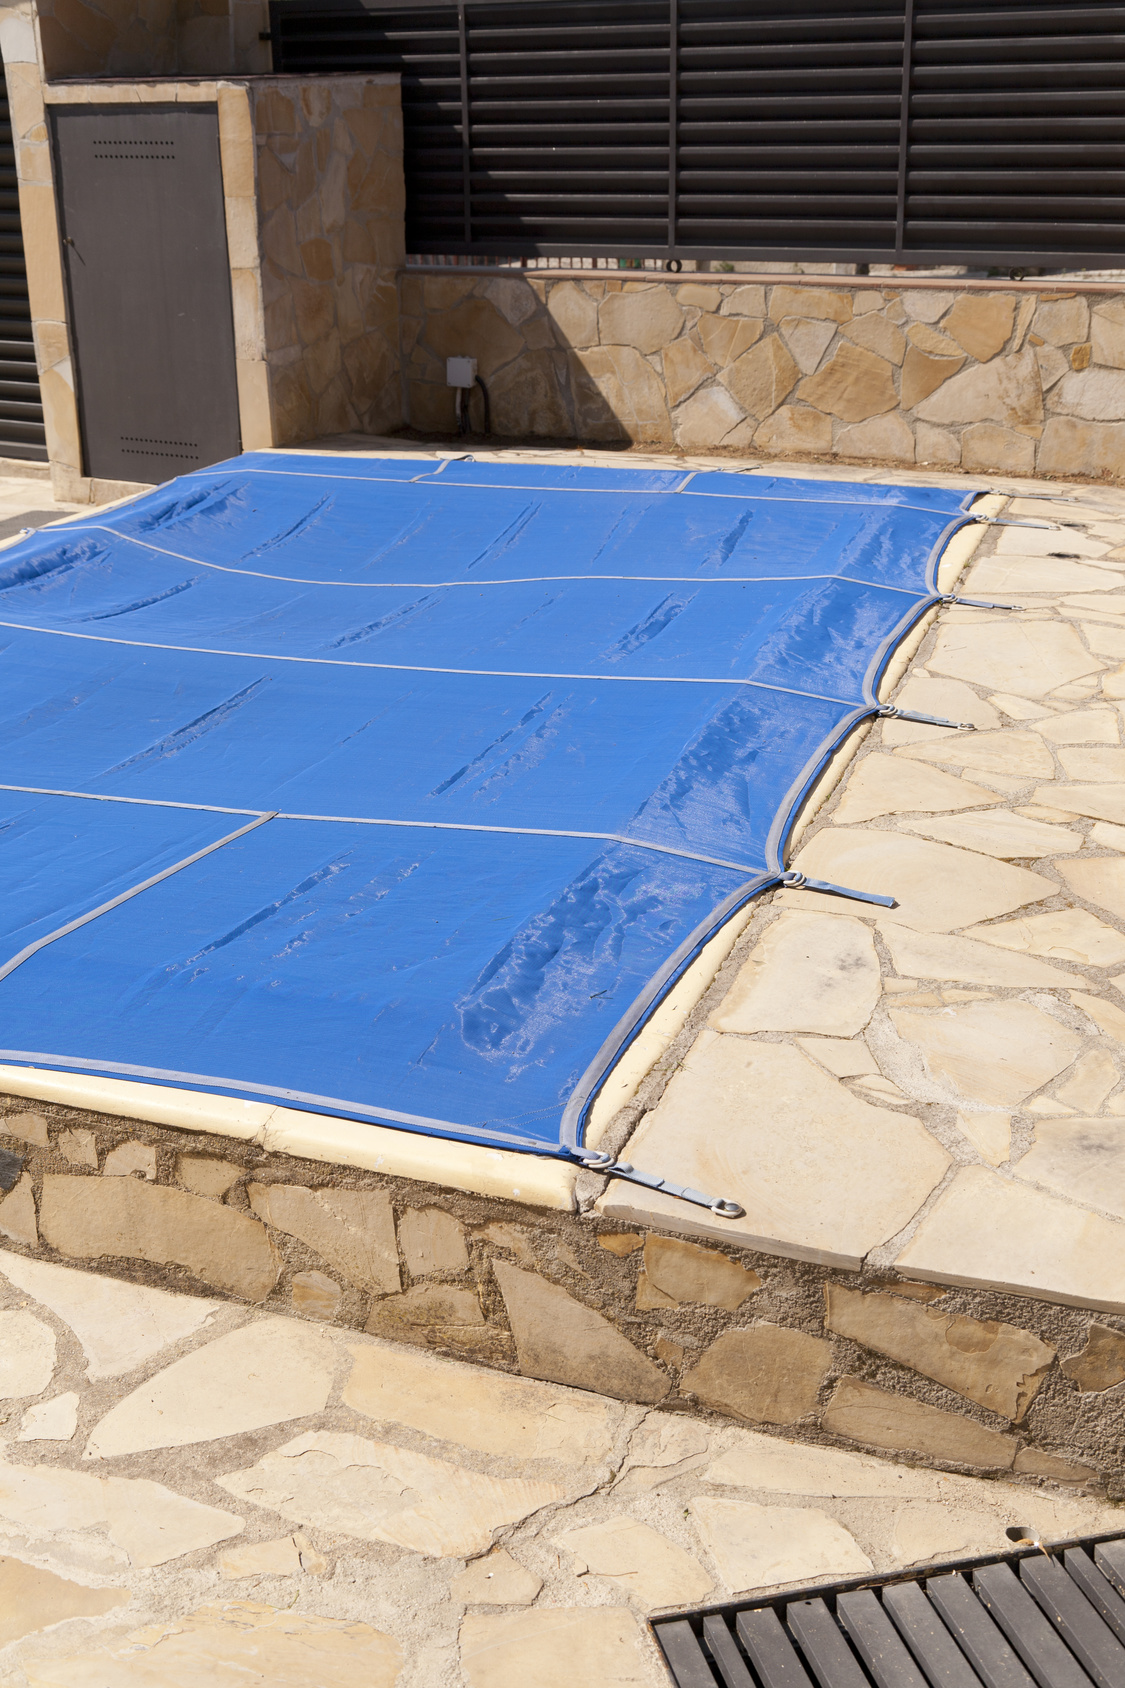 Common Pool Cover Problems